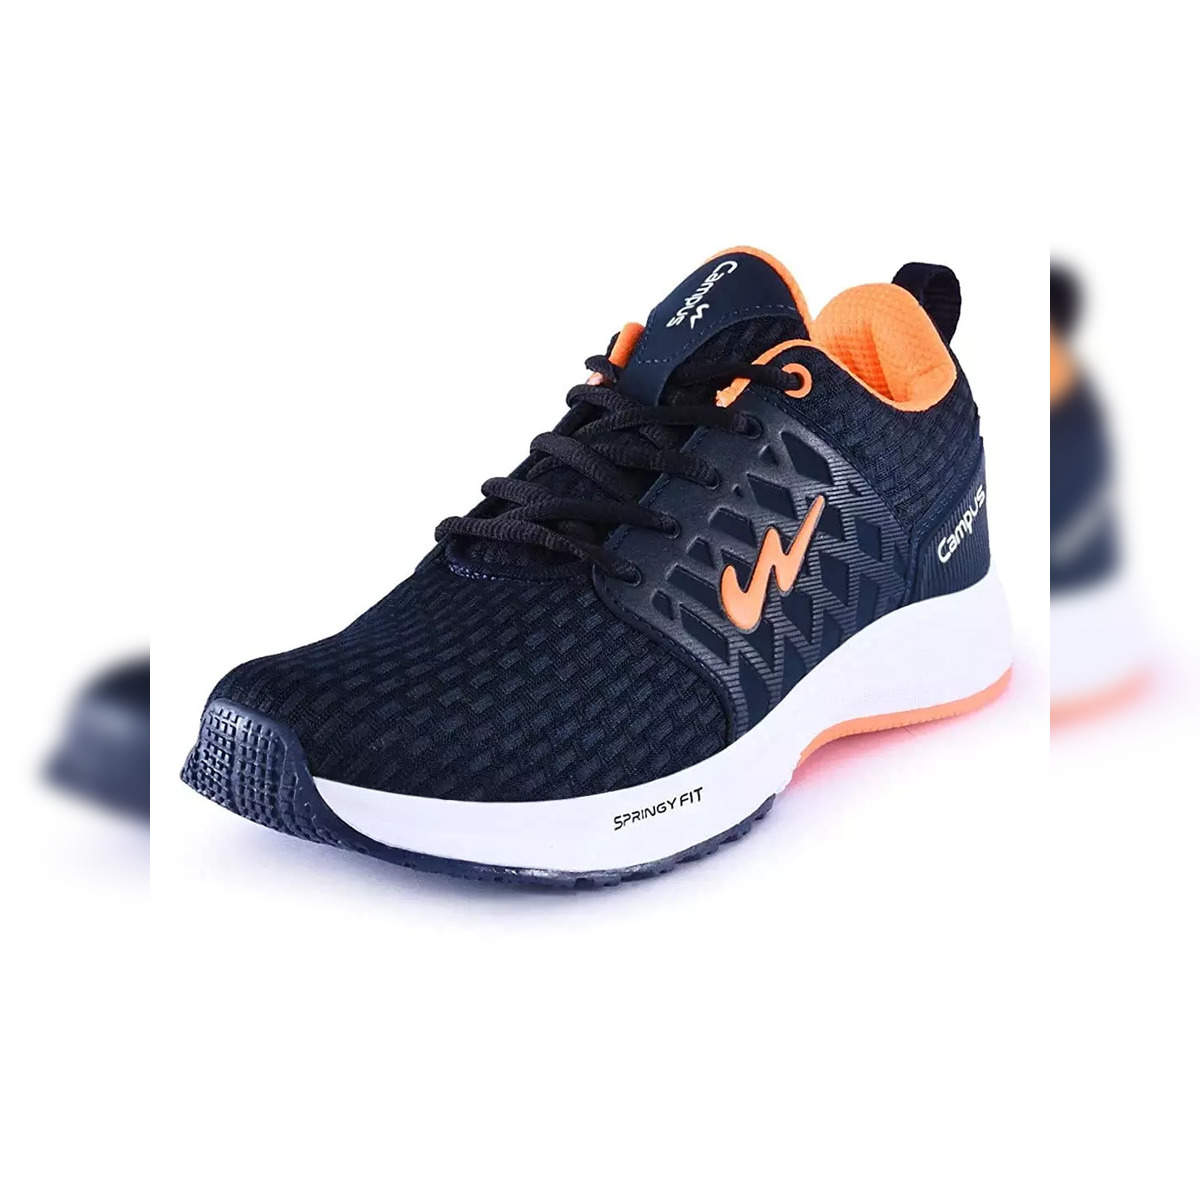 Buy Running Shoes For Men: Costa-Off-Wht-R-Blu | Campus Shoes